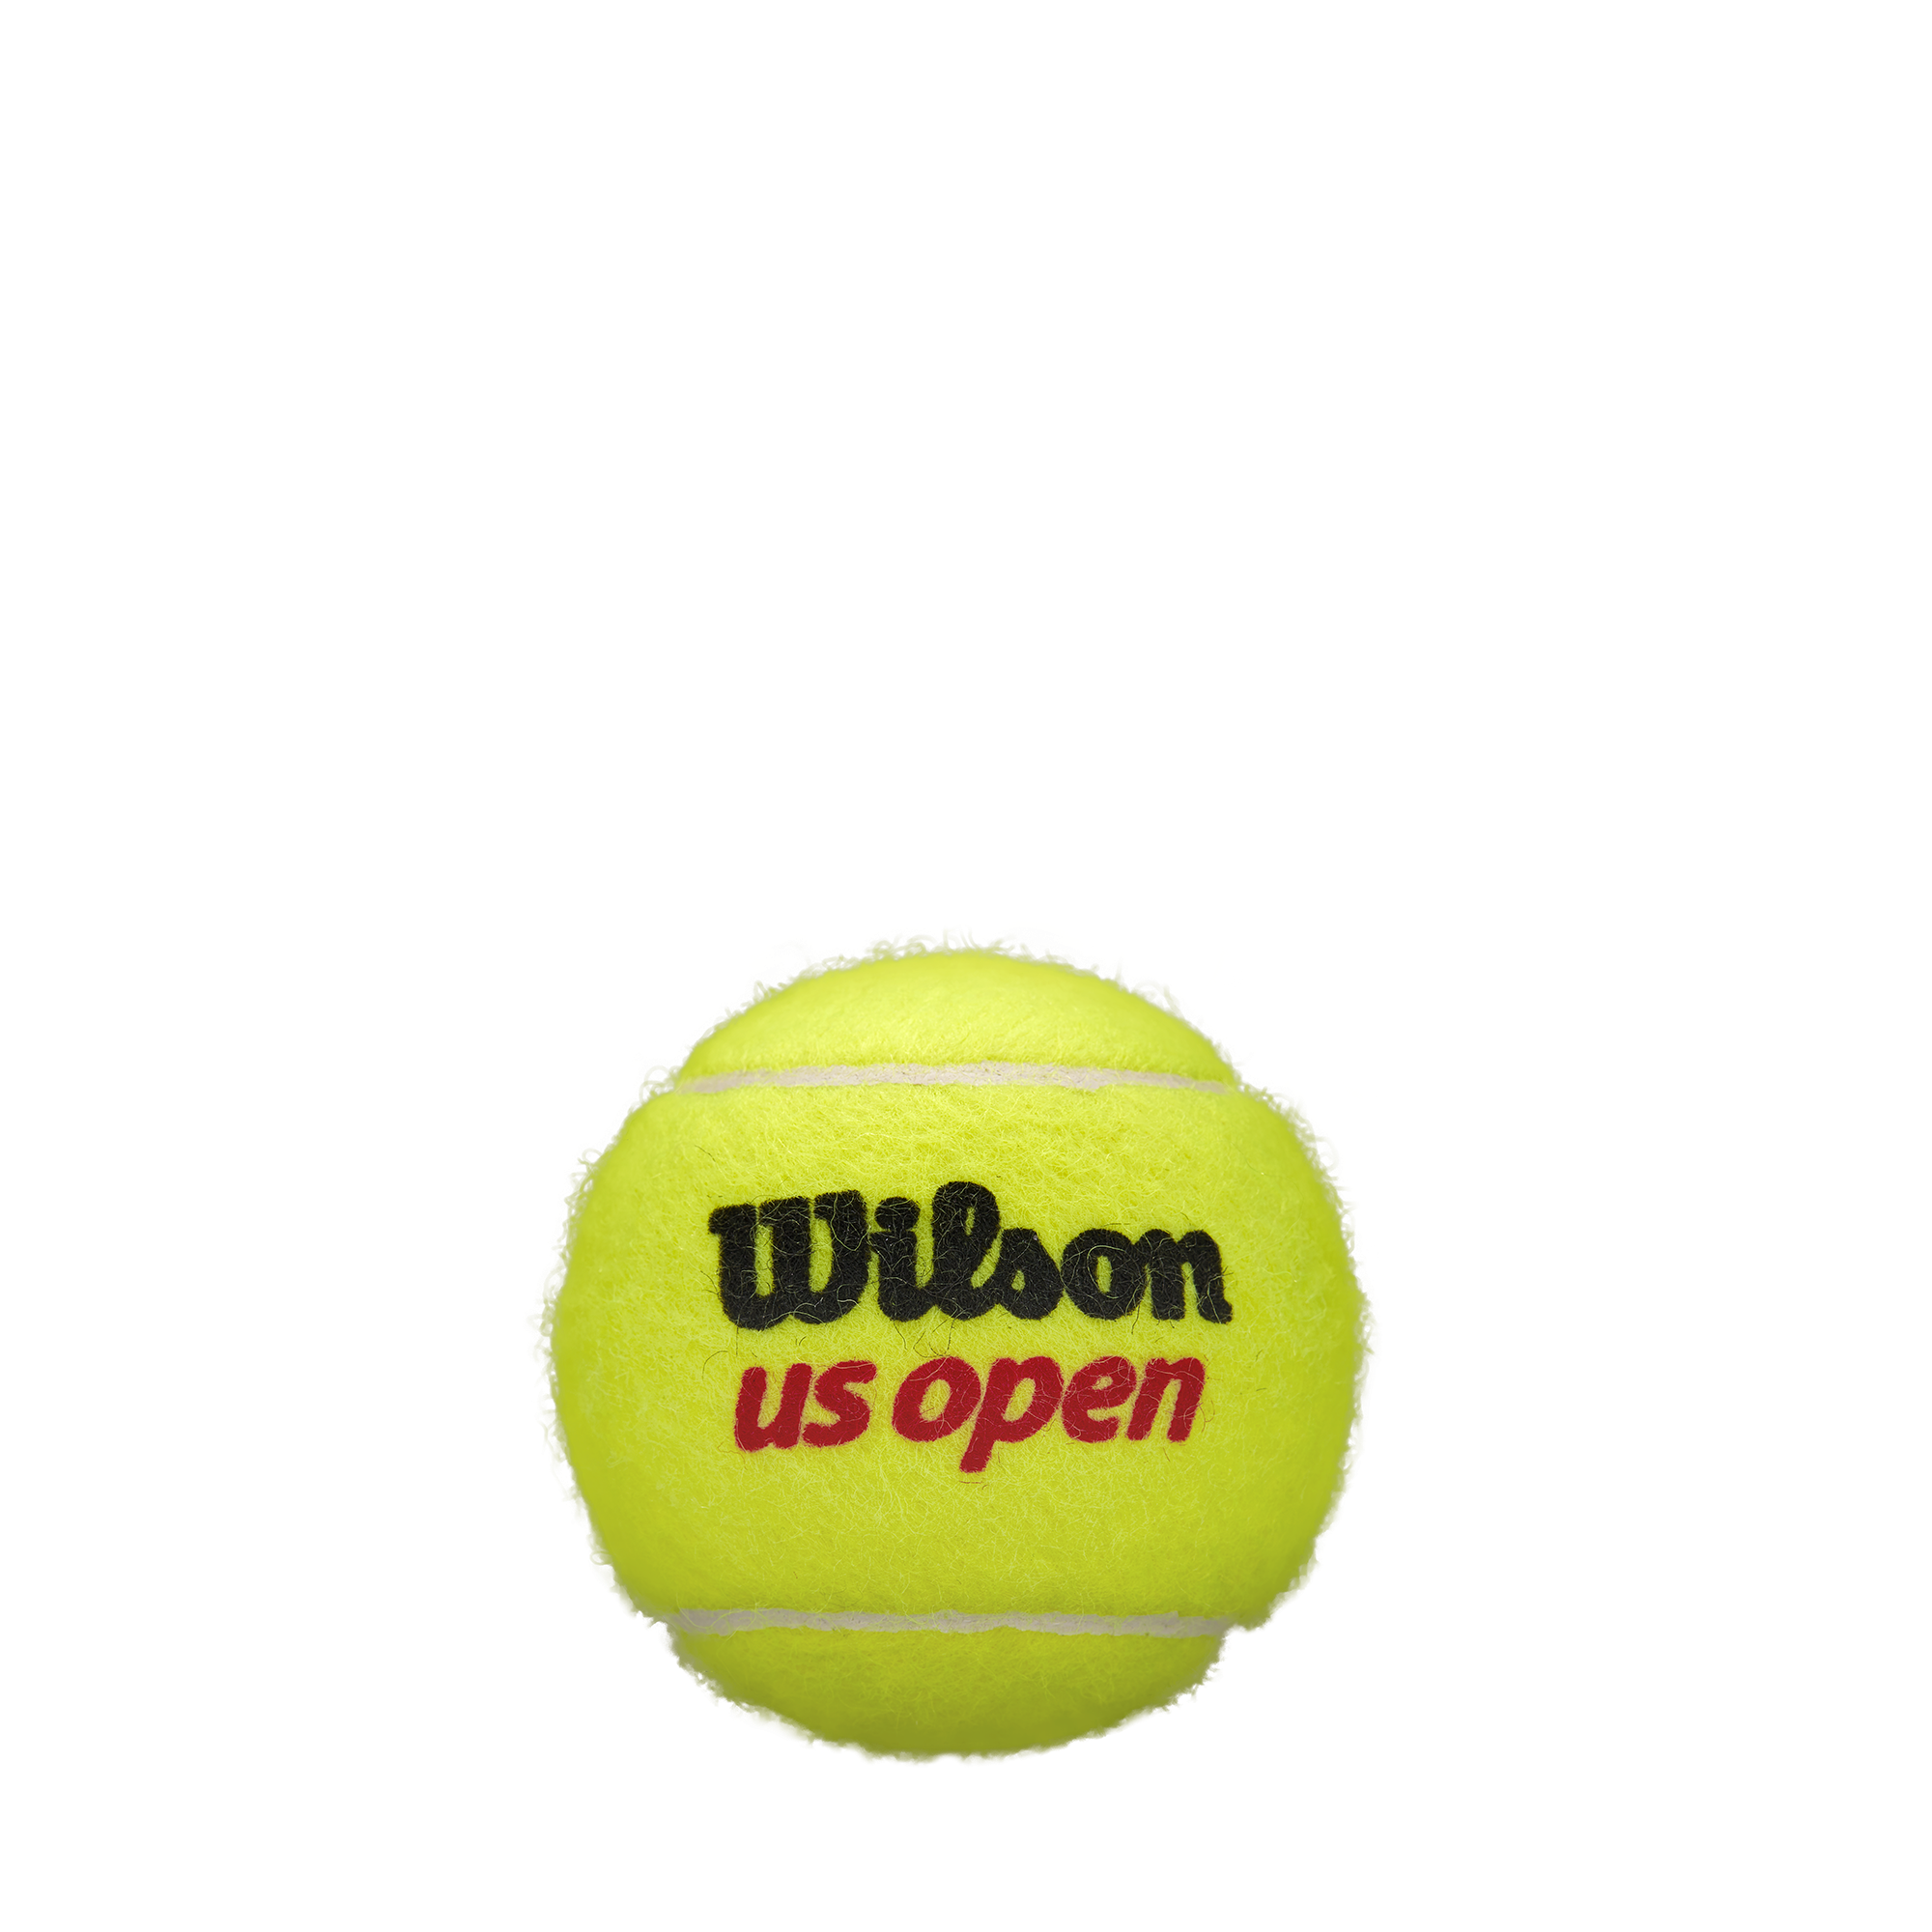 Wilson Us Open Extra Duty - Canette Individuel (4 Balles)